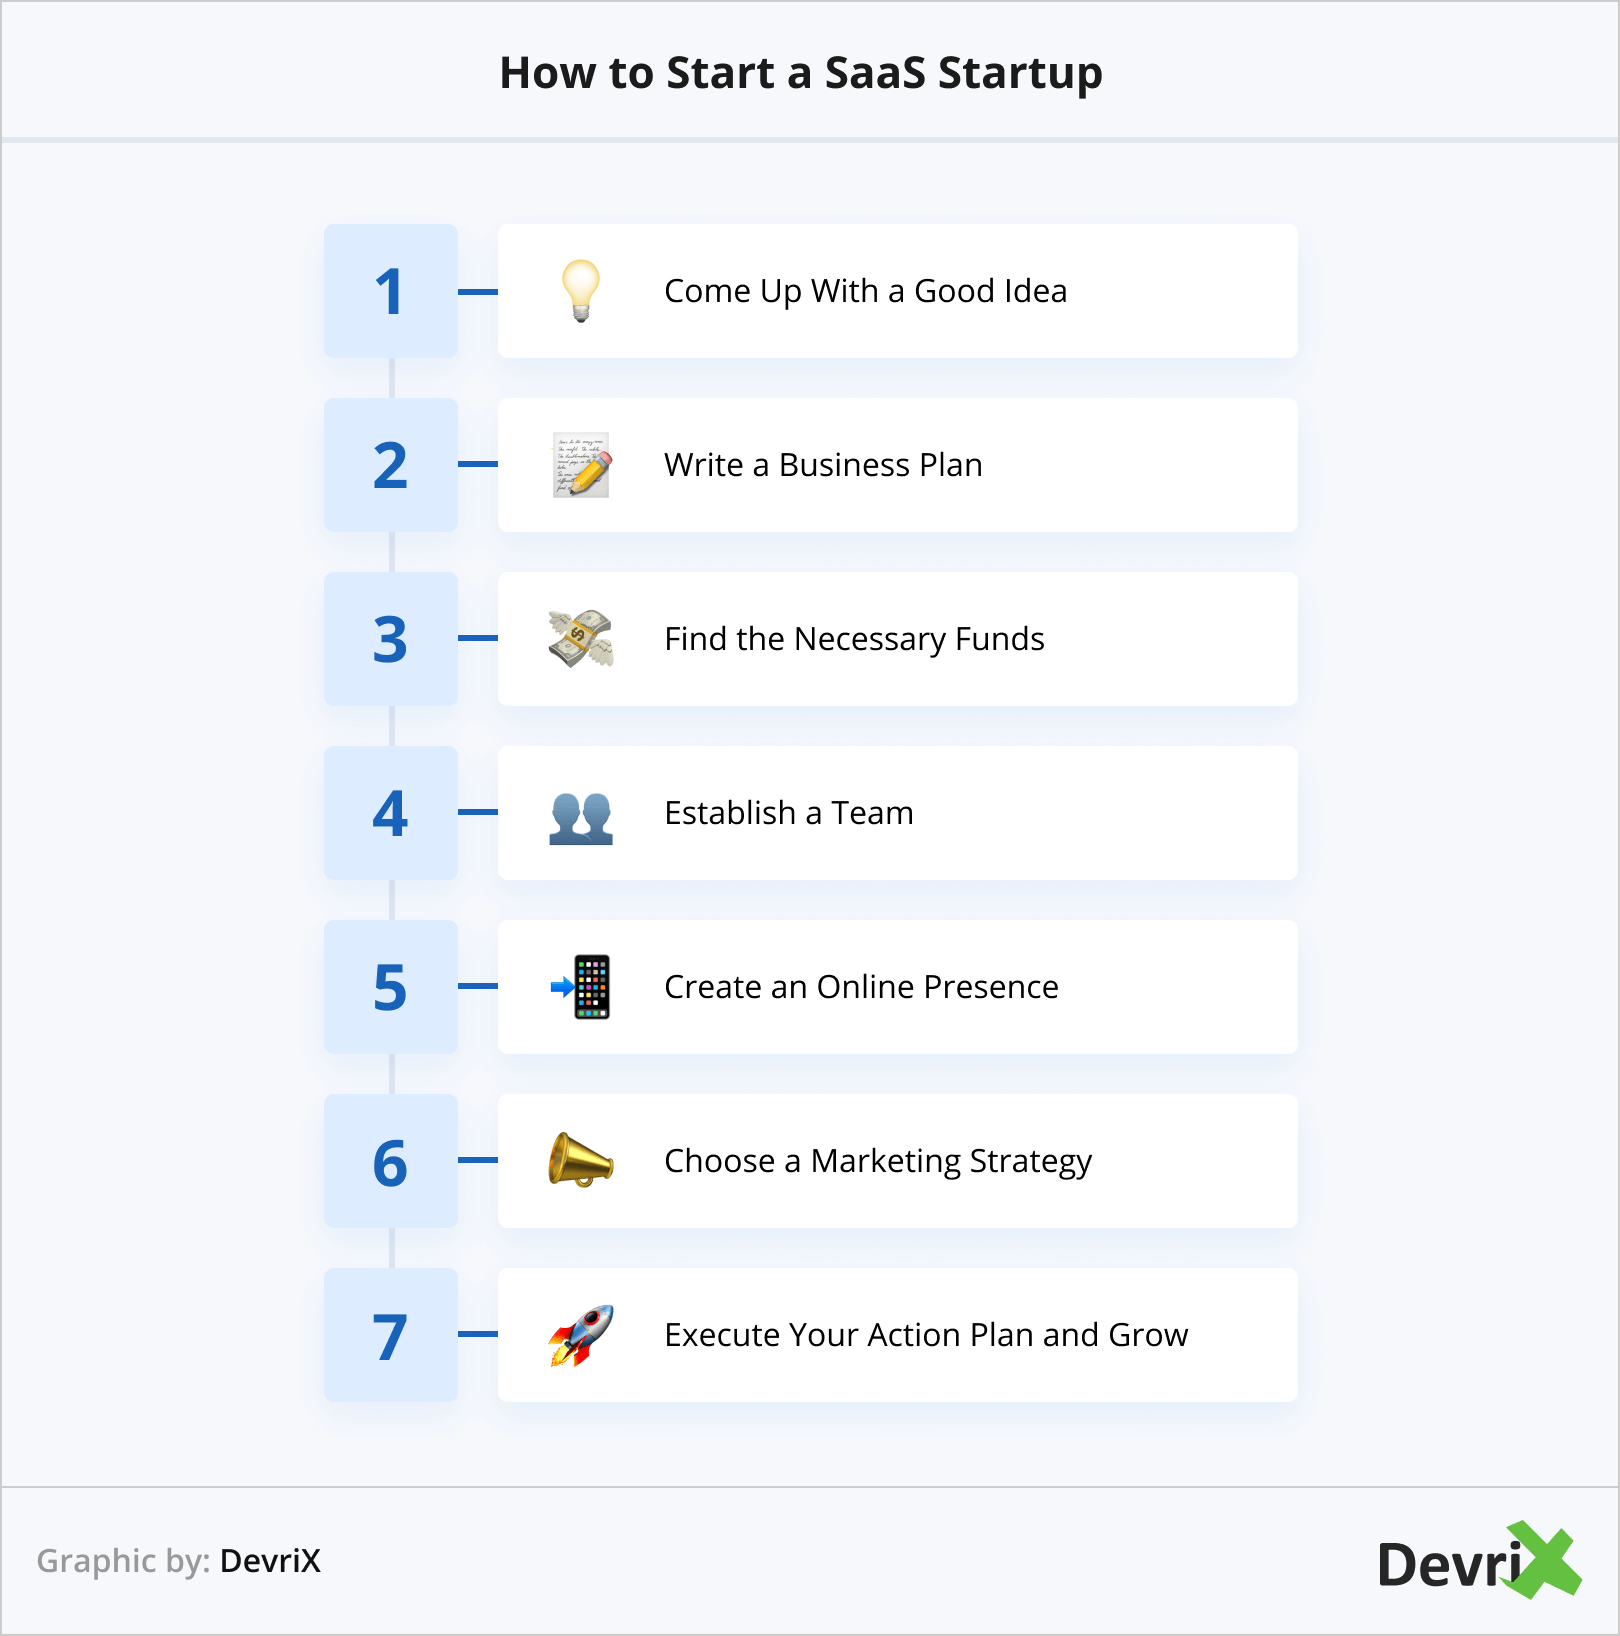 How to Start a SaaS Startup